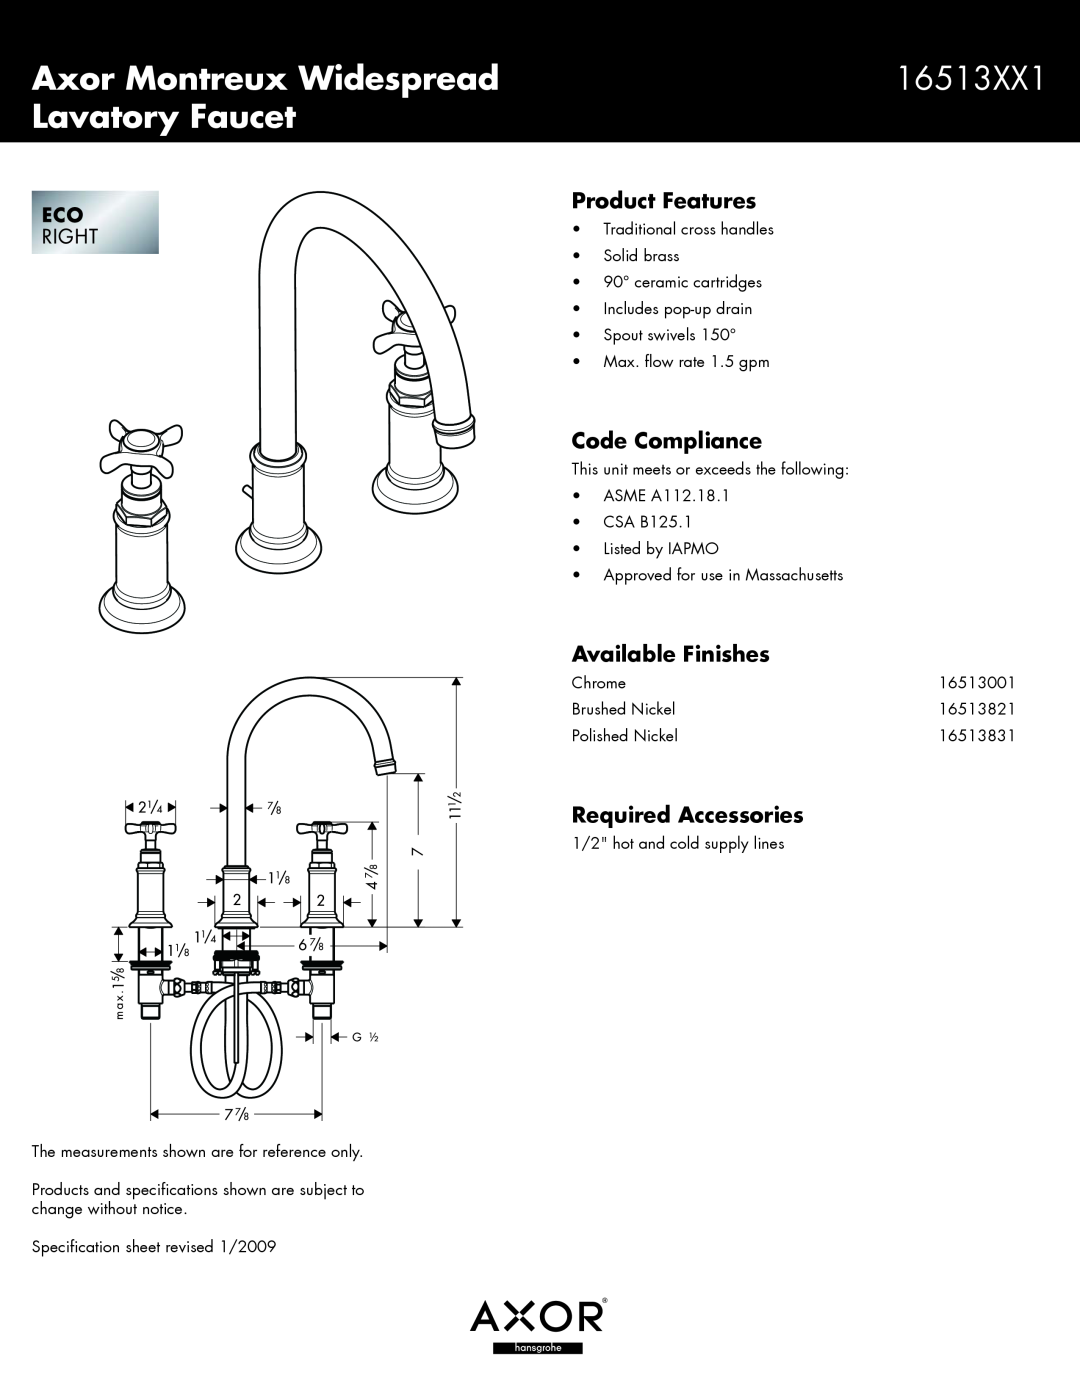 Axor 16513001 specifications Axor Montreux Widespread, 16513XX1, Lavatory Faucet, Product Features, Code Compliance 